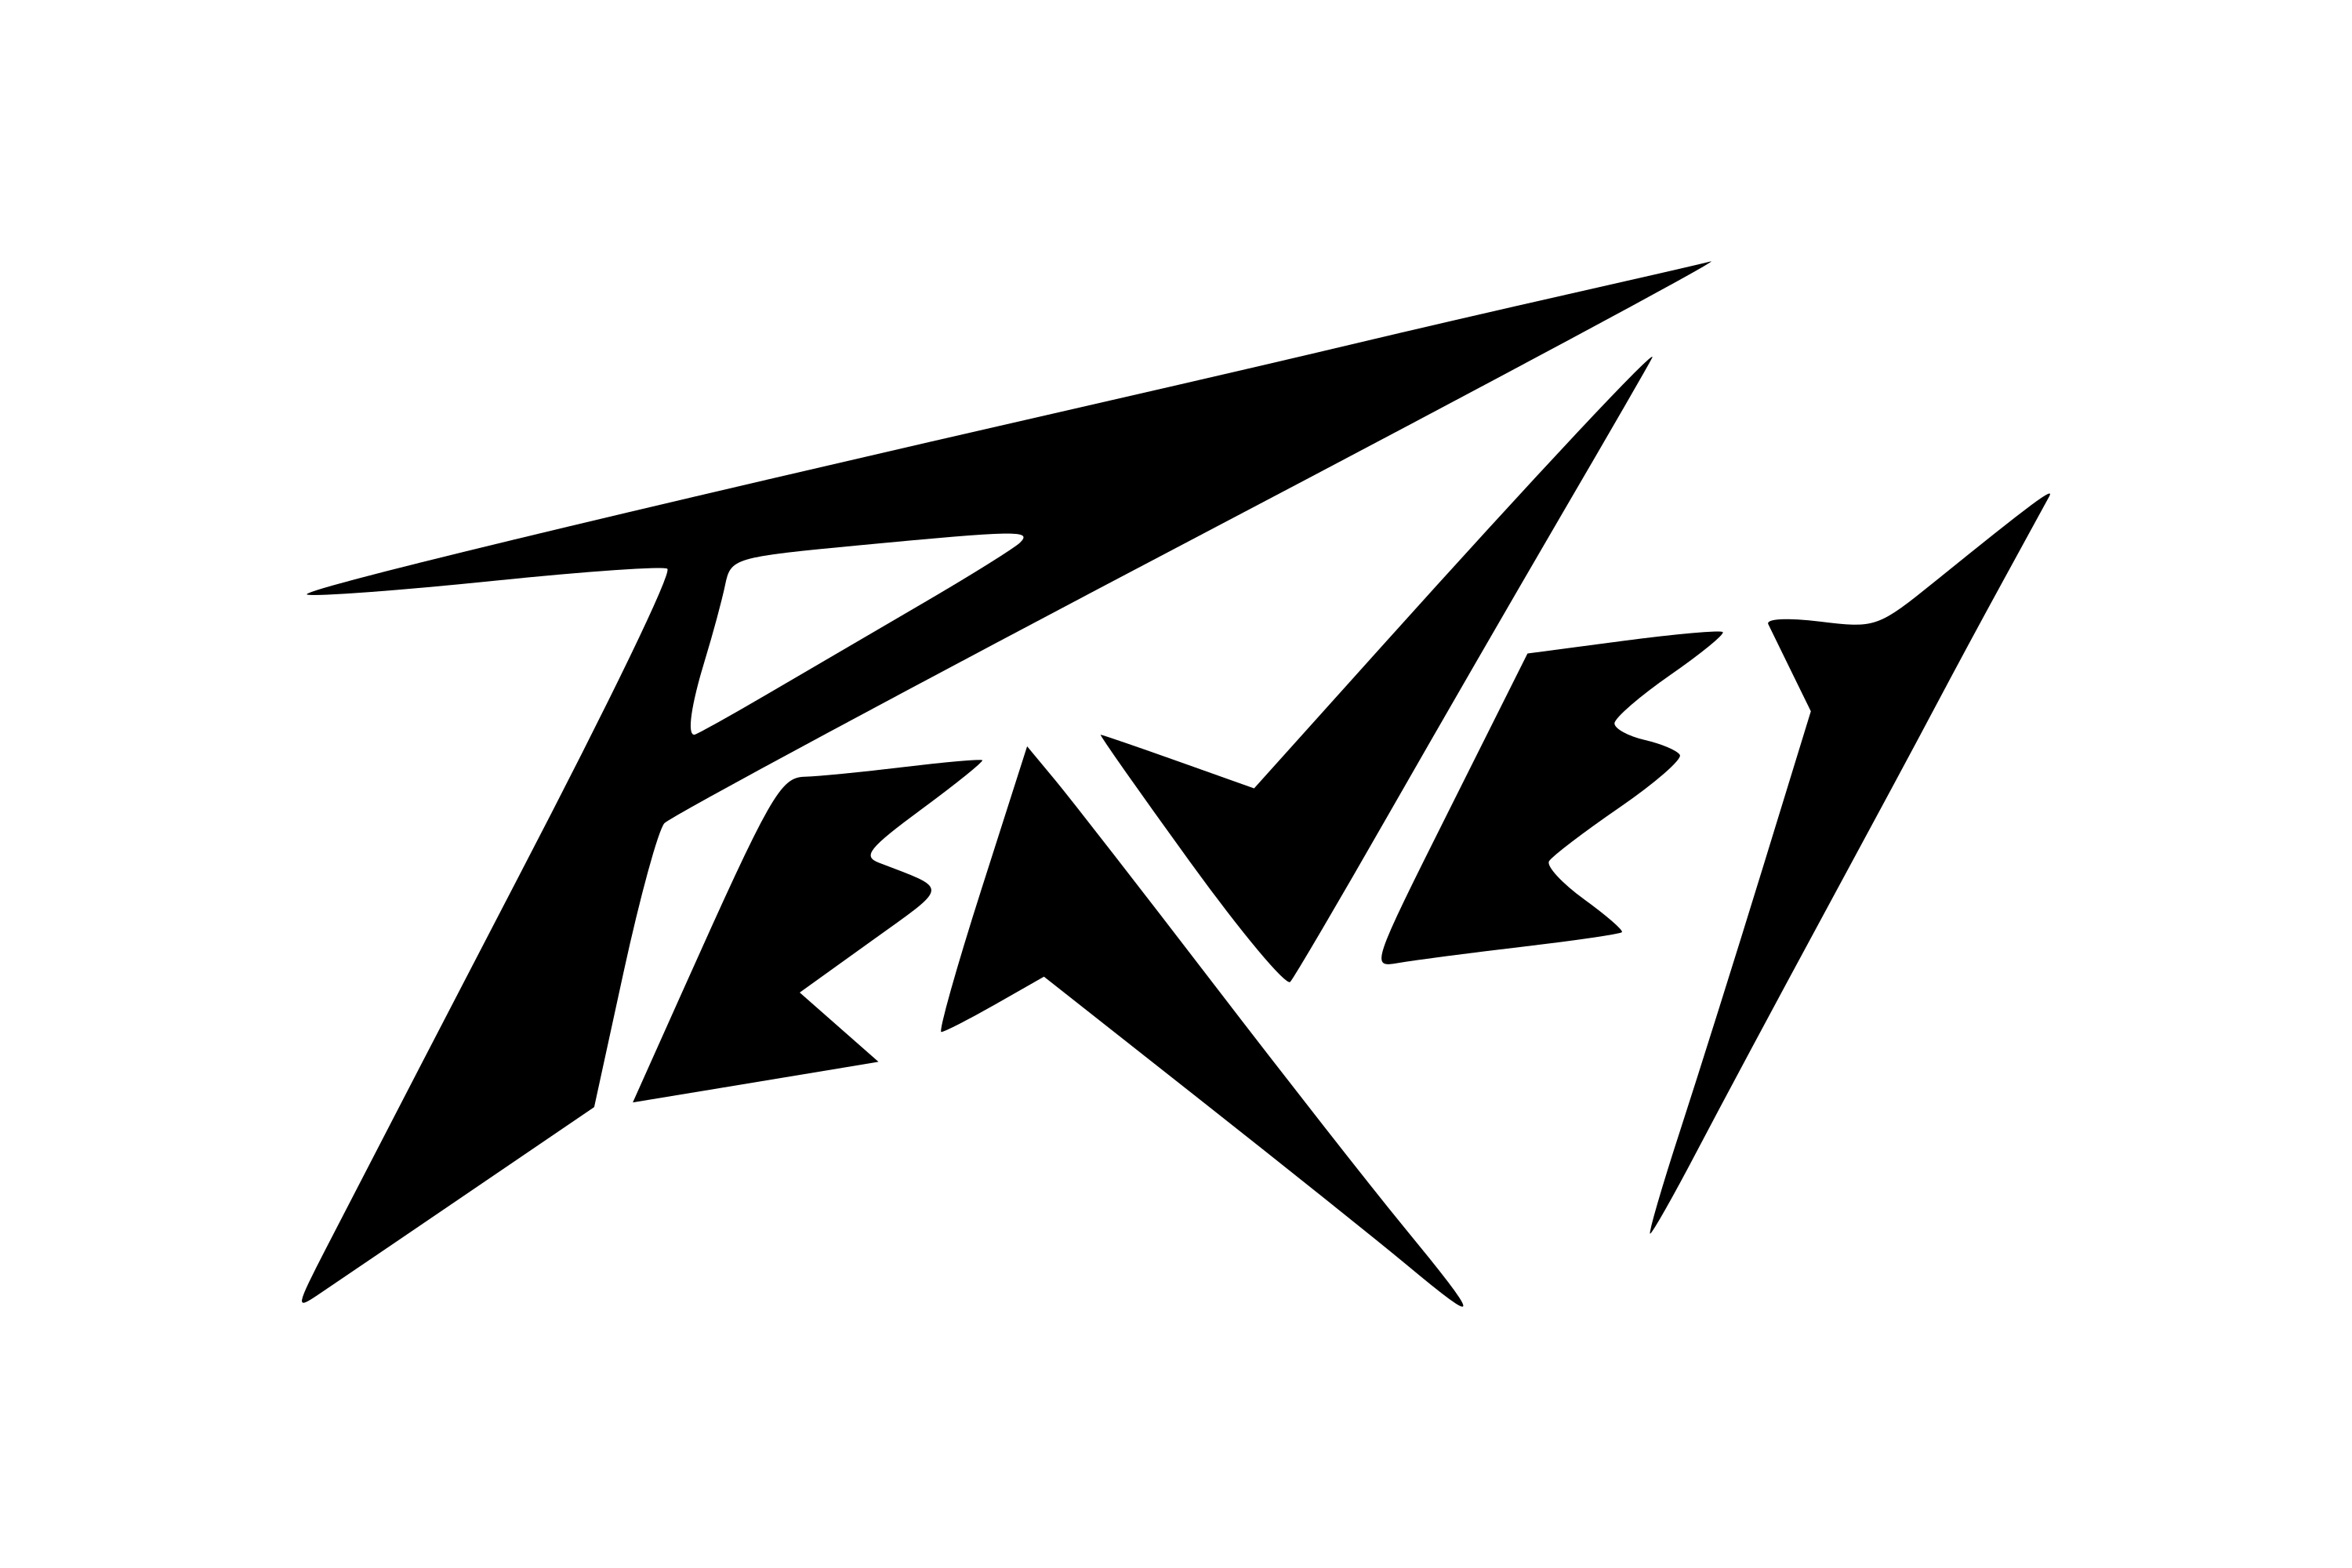 Download Peavey Electronics Logo in SVG Vector or PNG File Format